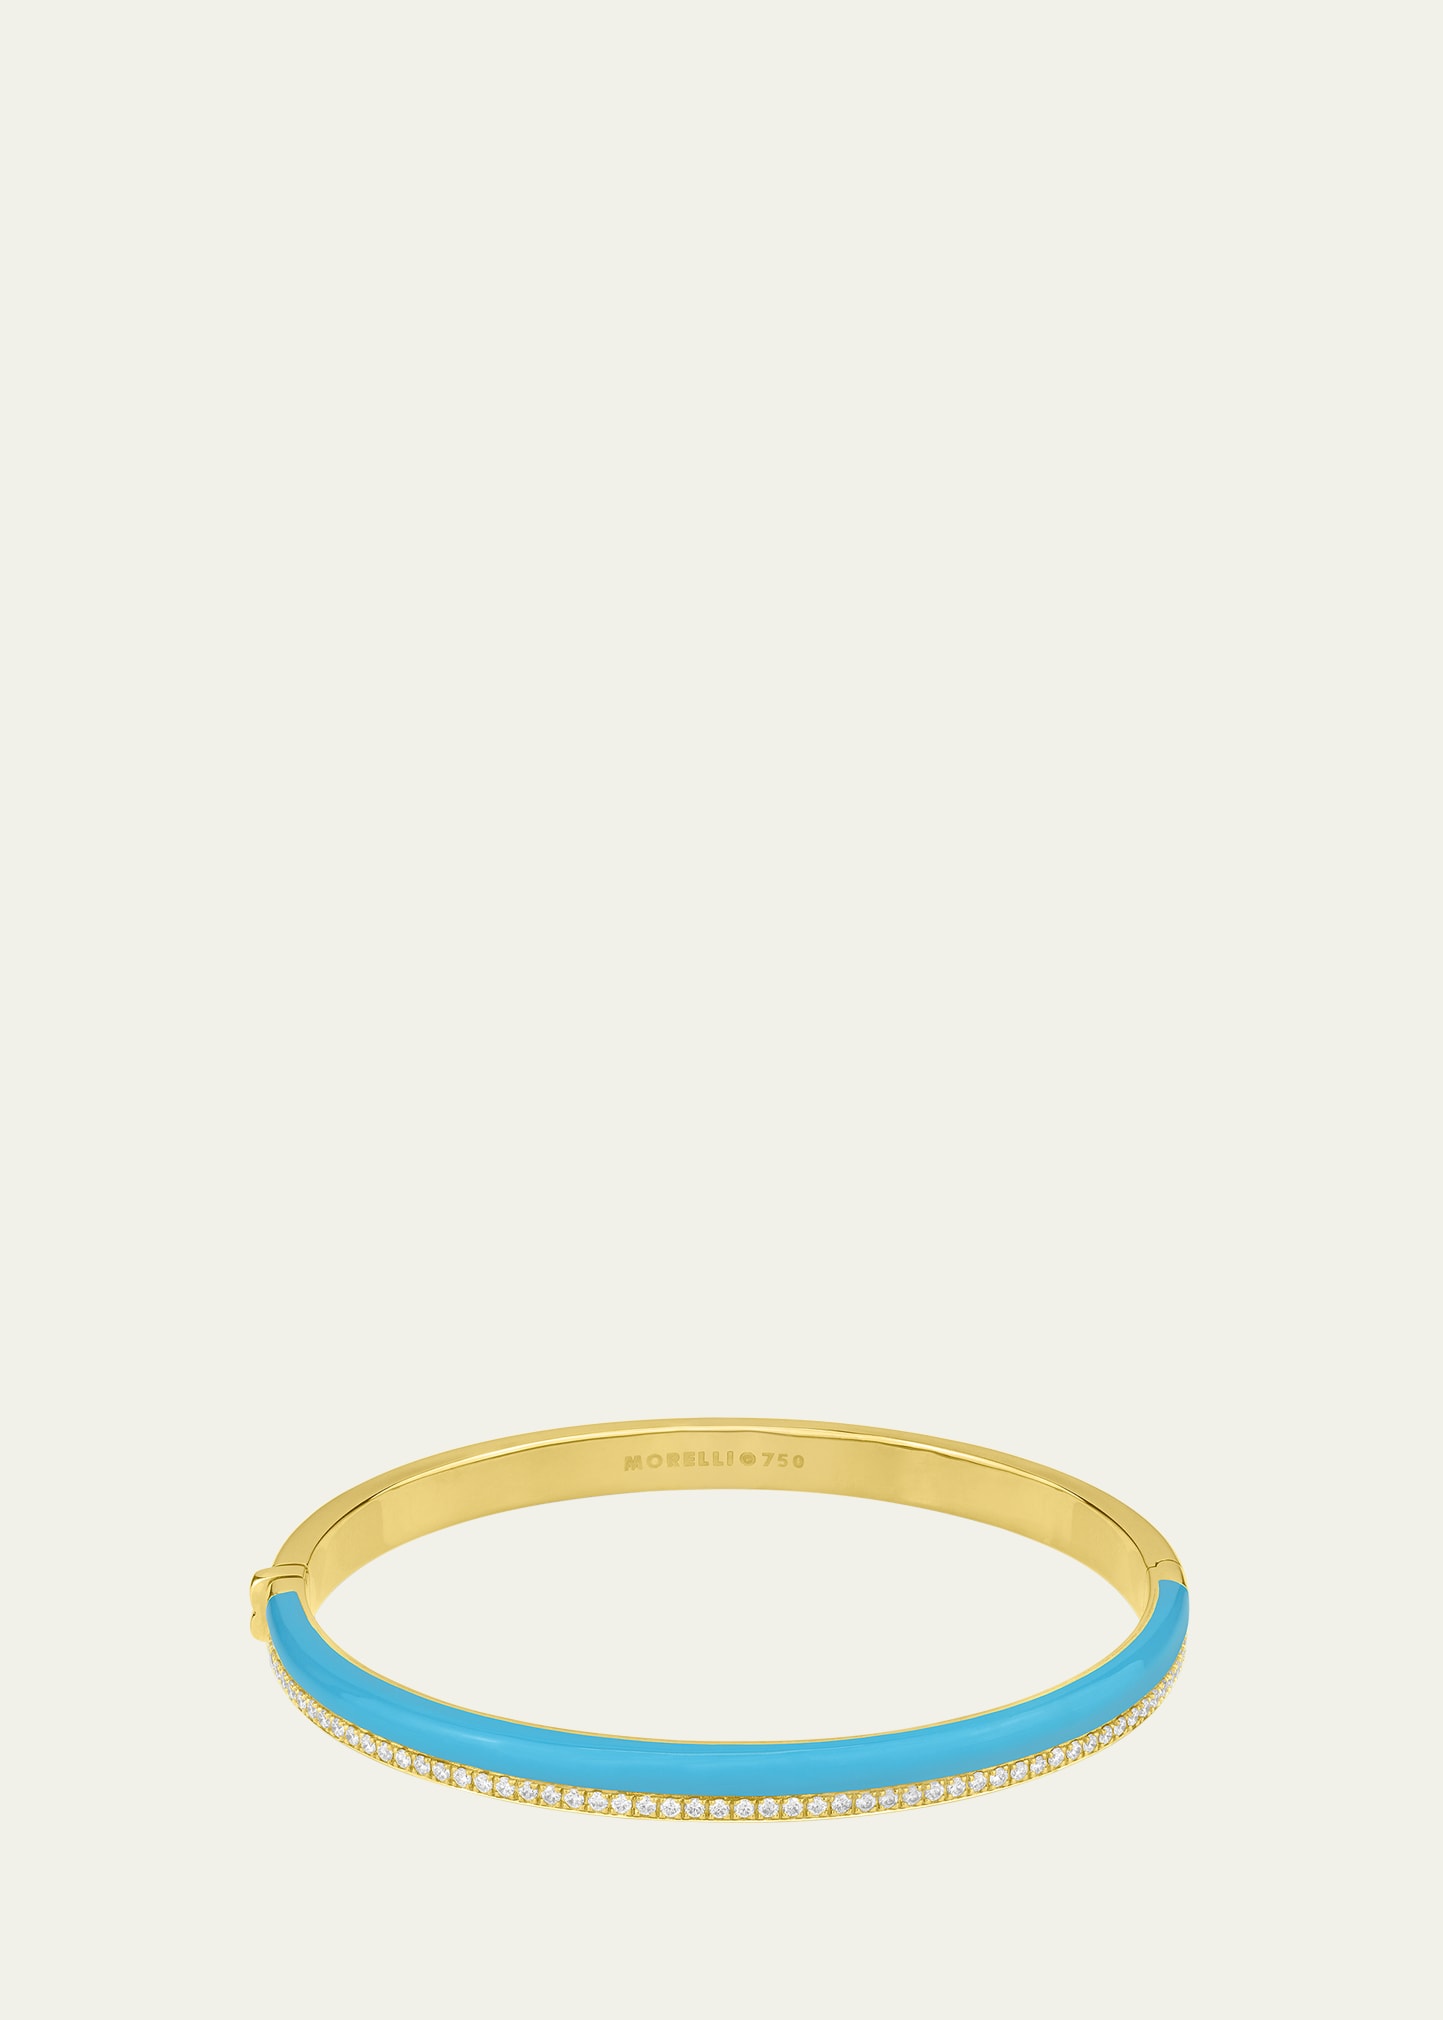 Pinpoint Yellow Gold Bangle Bracelet with Diamonds and Turquoise Enamel, Size L